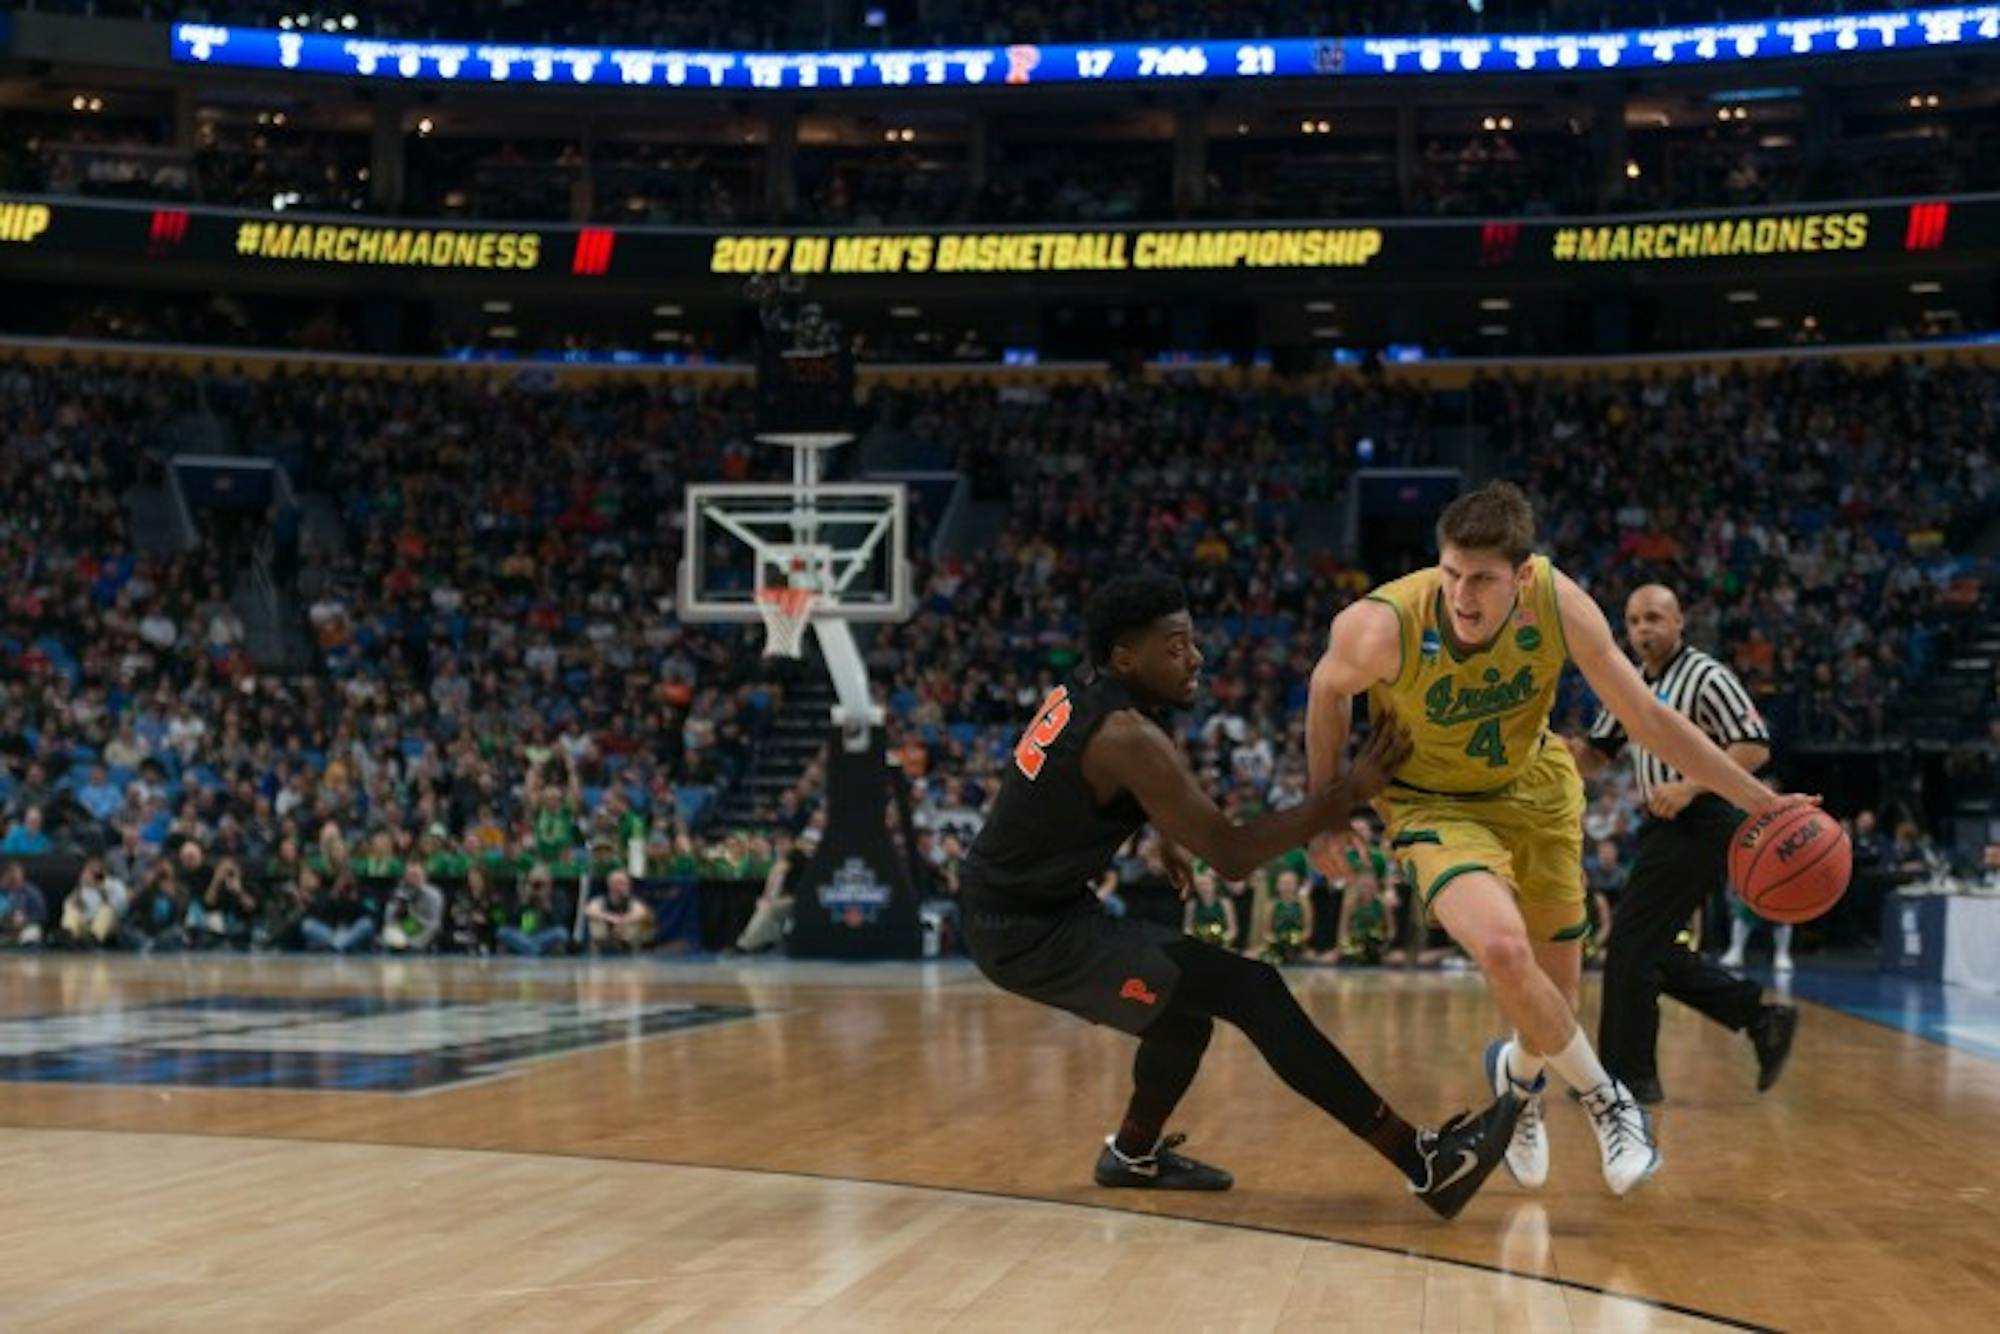 Irish sophomore forward Matt Ryan attempts to get around a defender during Notre Dame's 60-58 victory over Princeton on Thursday at KeyBank Arena.